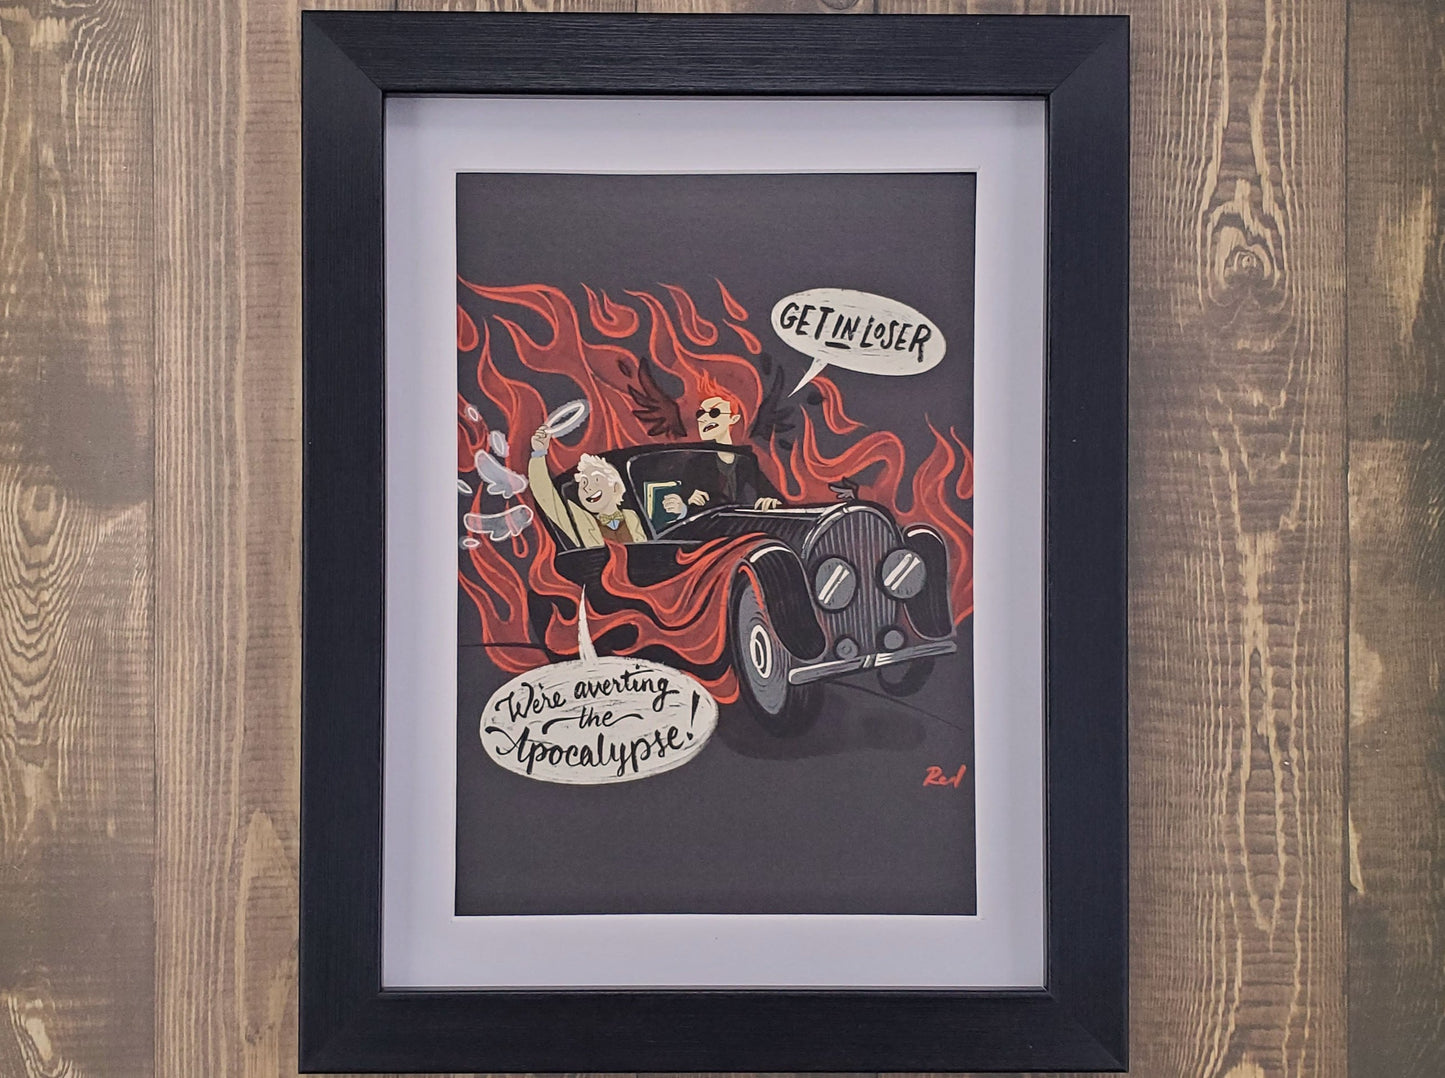 Good Omens Print | Get in Loser - We're averting the Apocalypse!